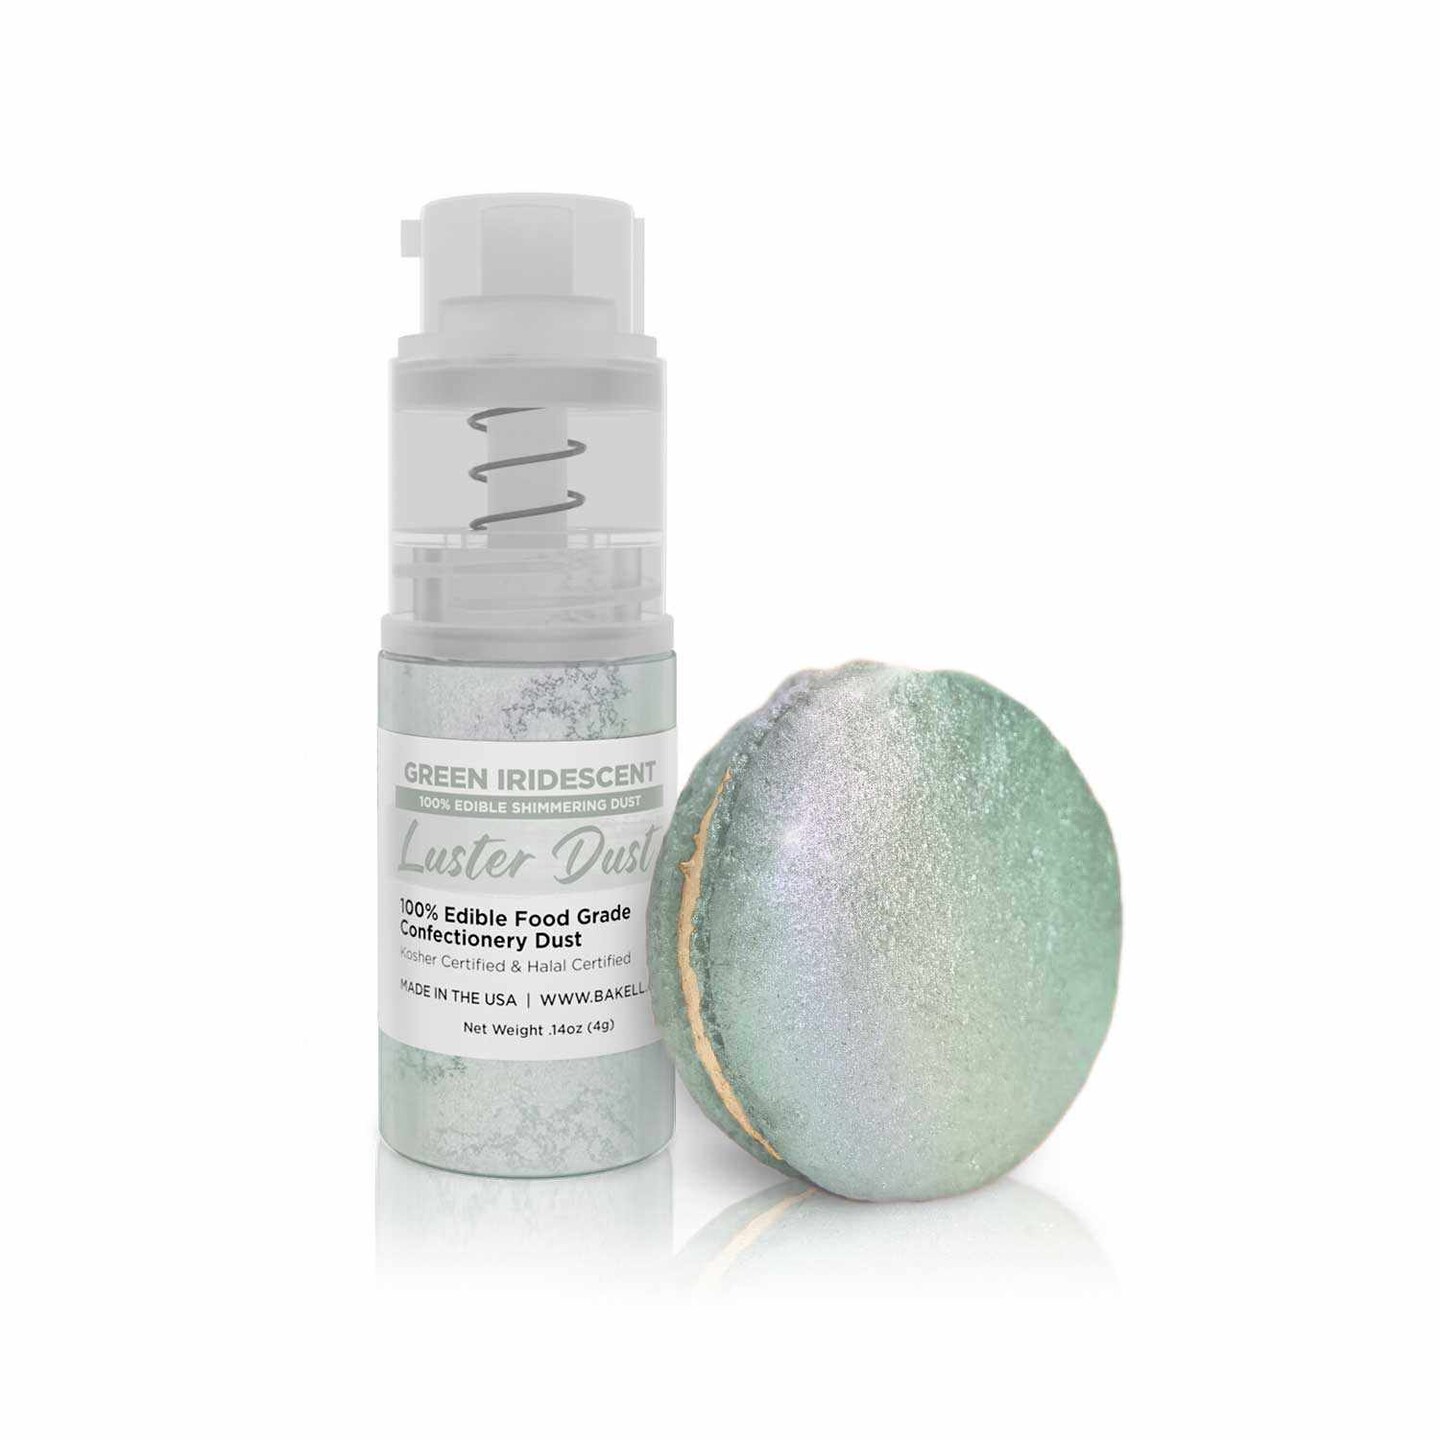 Green Iridescent Luster Dust Spray | Luster Dust Edible Glitter Spray Dust for Cakes, Cookies, Desserts, Paint. FDA Compliant (4 Gram Pump)